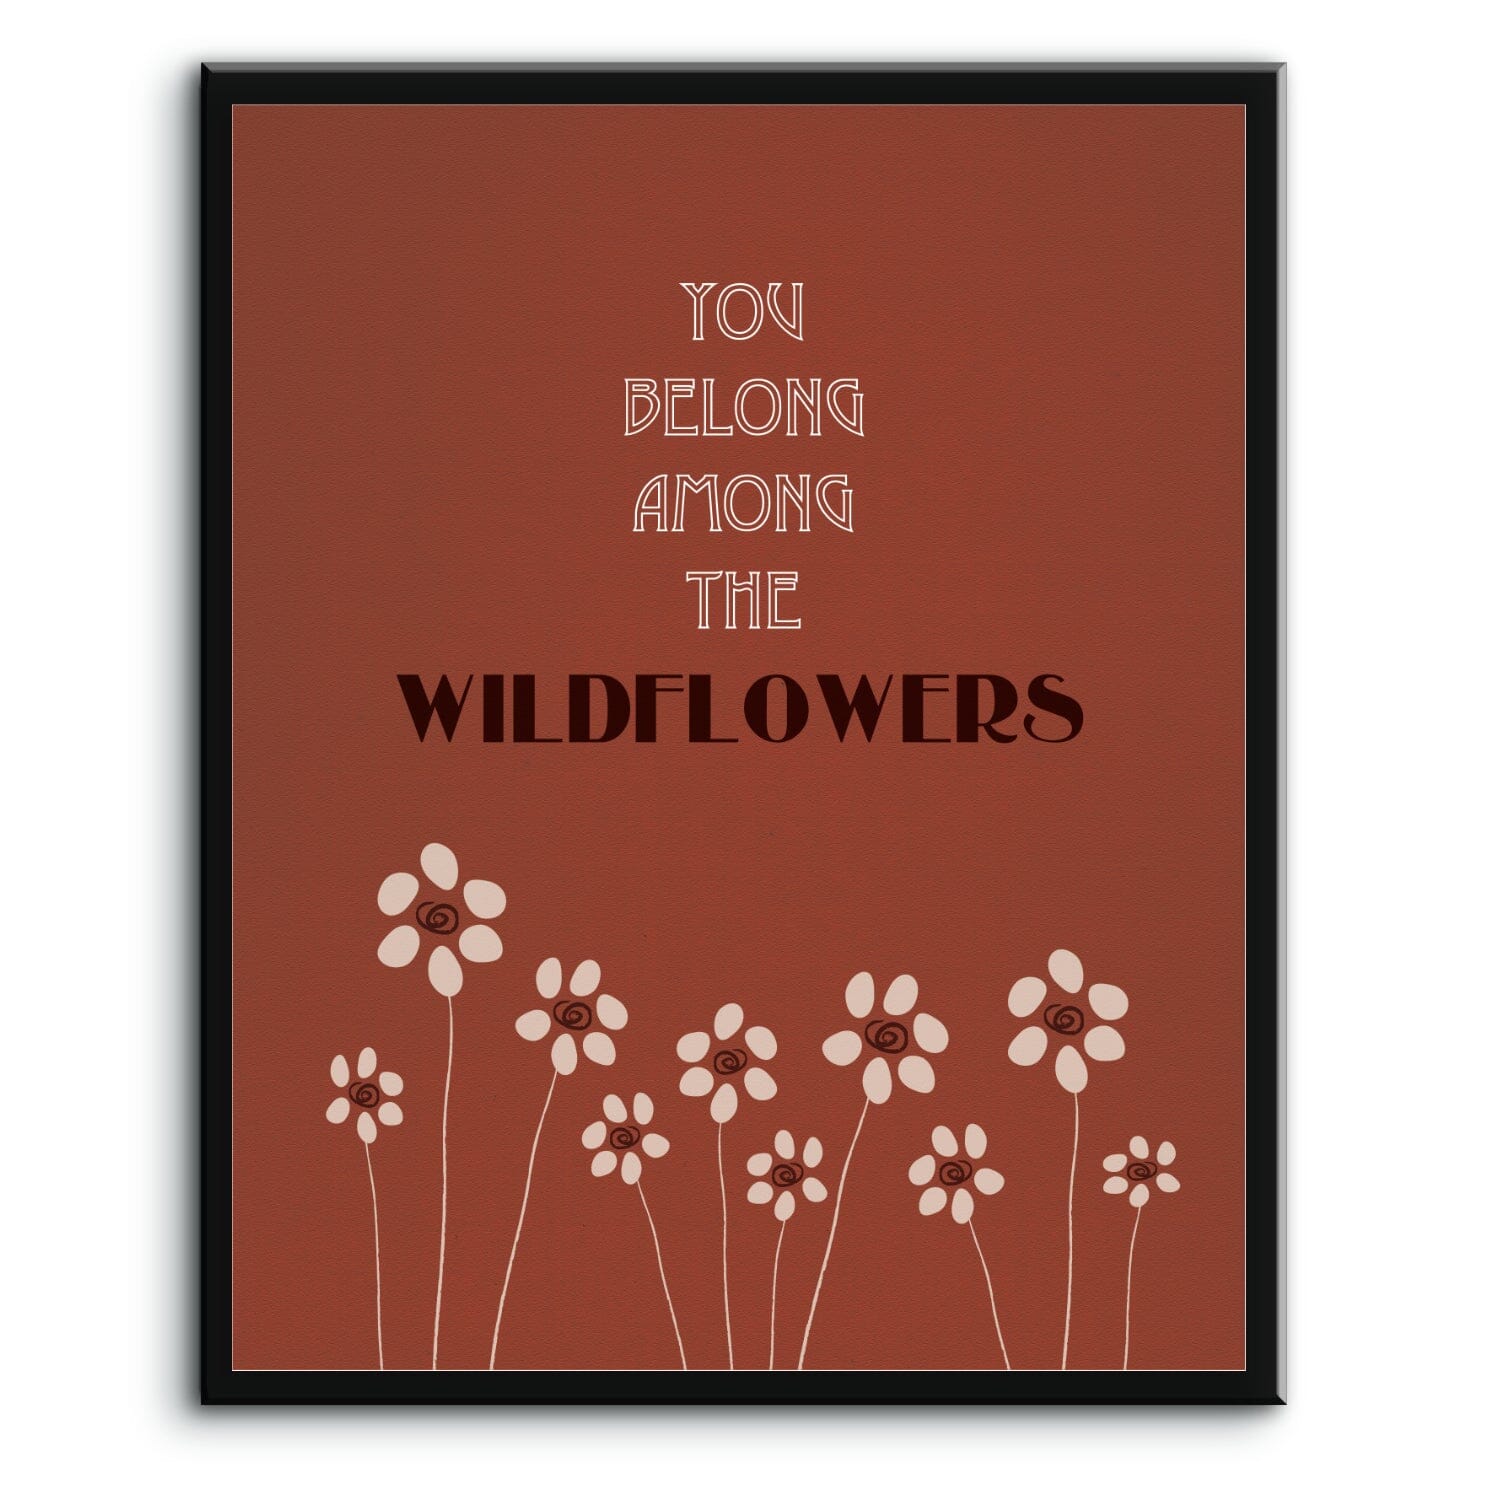 Wildflowers by Tom Petty - Music Poster Song Lyric Art Print Song Lyrics Art Song Lyrics Art 8x10 plaque mount 